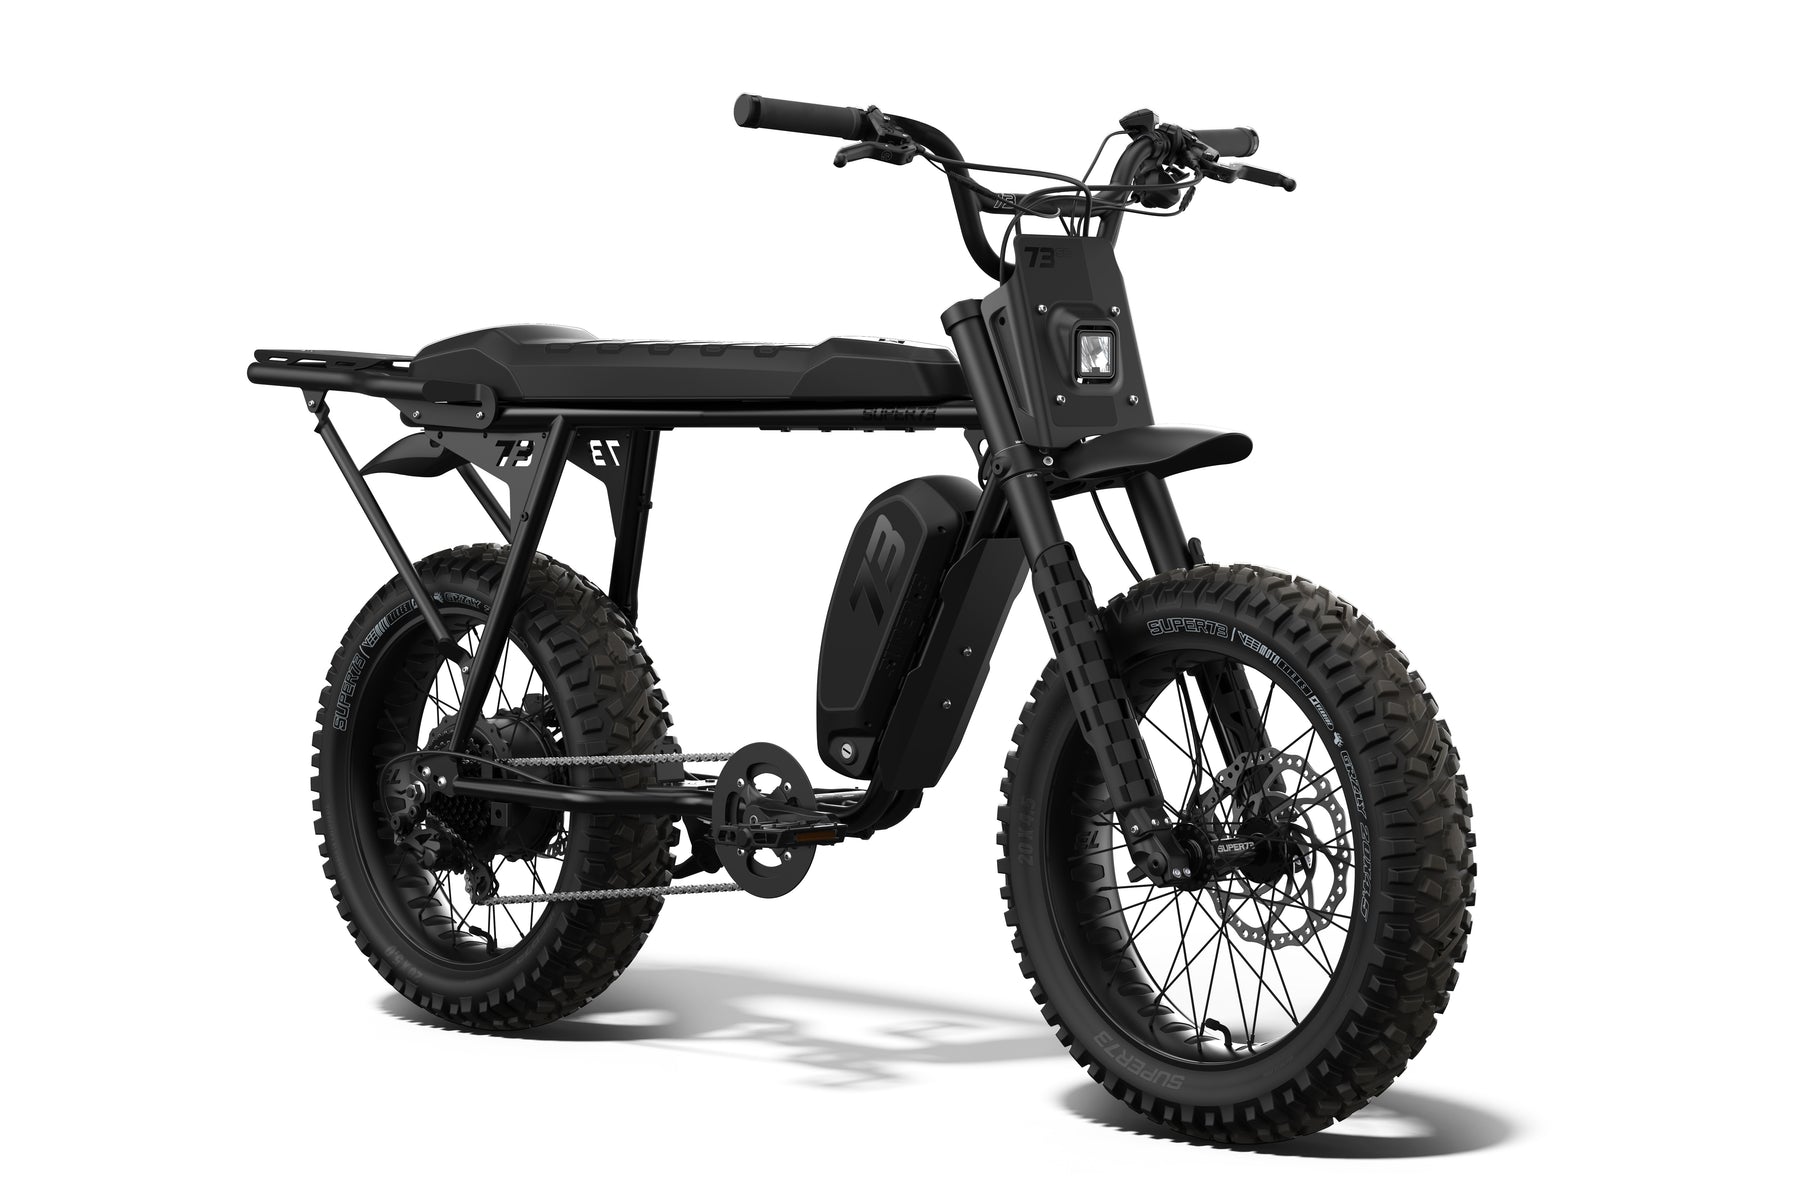 Front/side view of the SUPER73-S Blackout ebike.